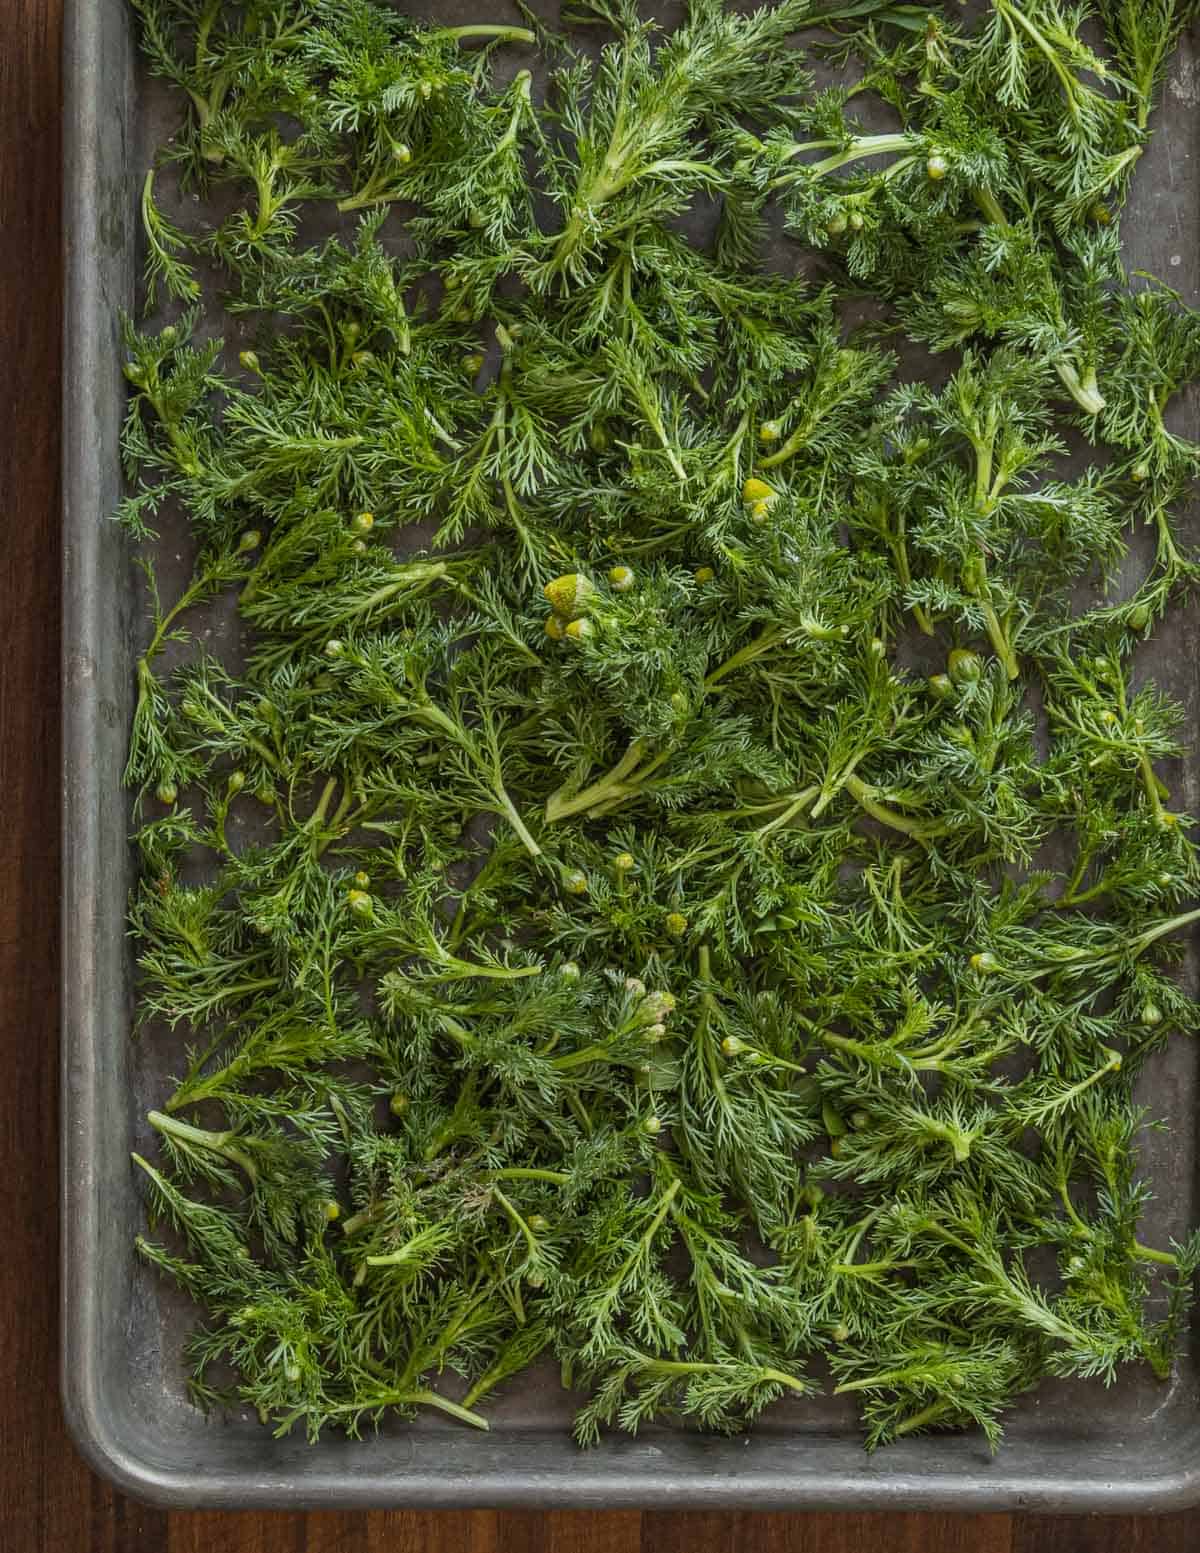 A baking sheet filled with wild chamomile or Matricaria discoidea leaves and flowers.